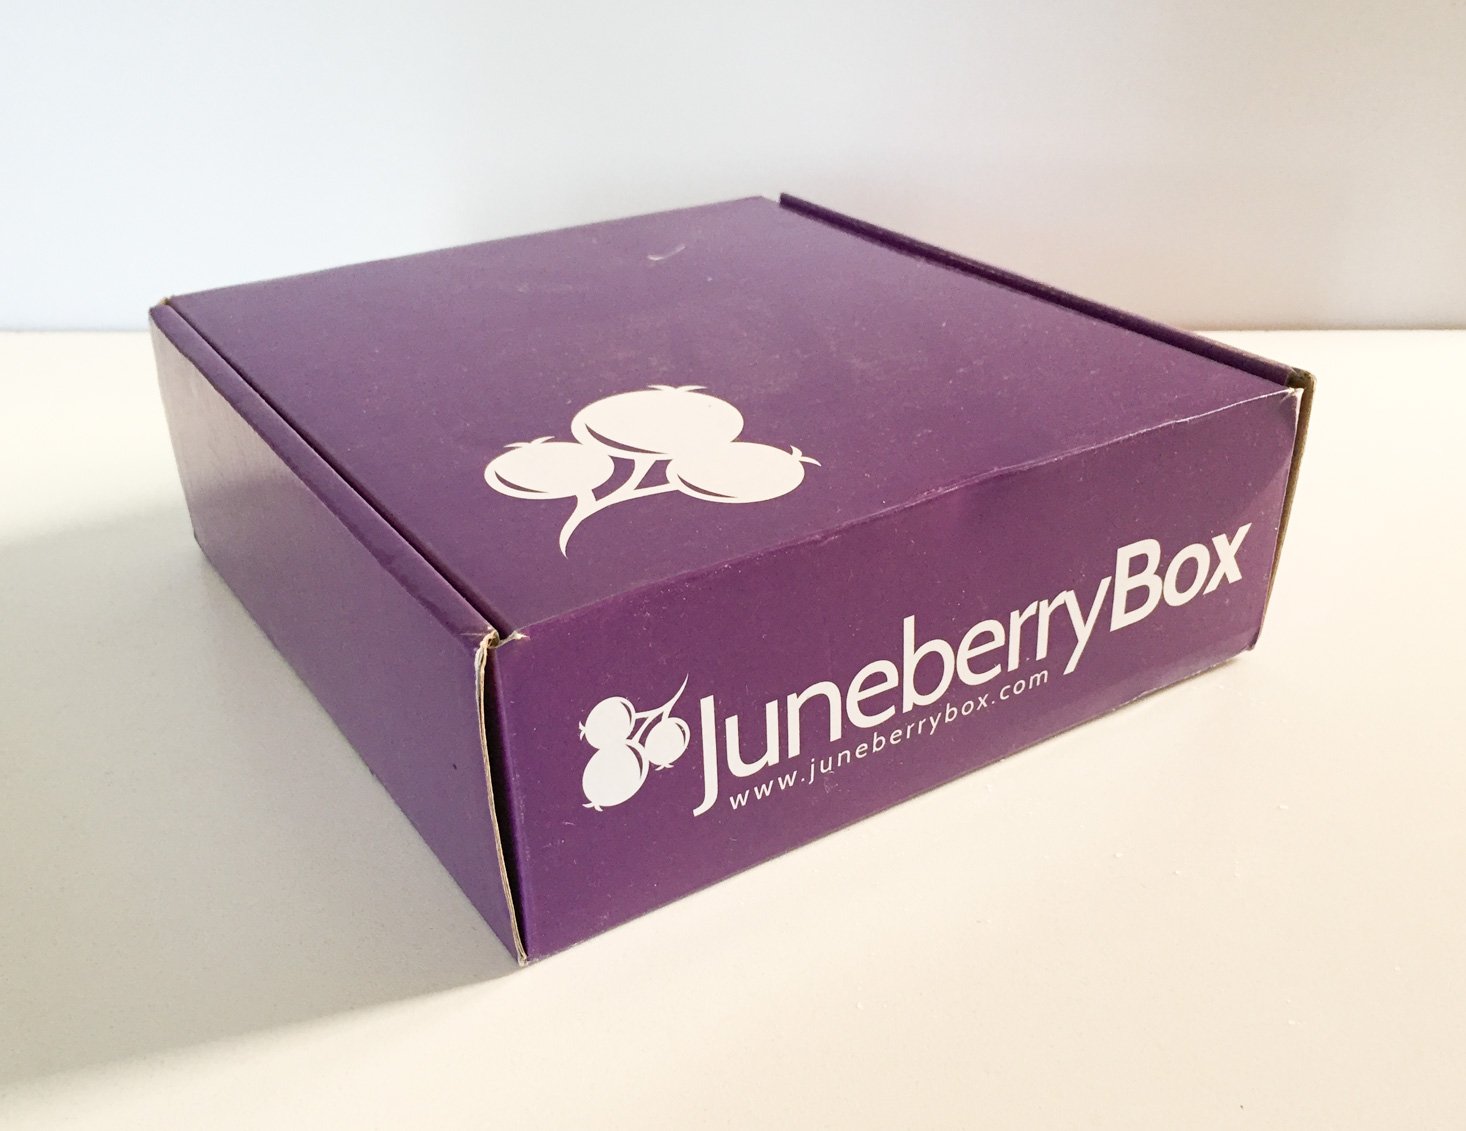 Juneberry Subscription Box Review – February 2017